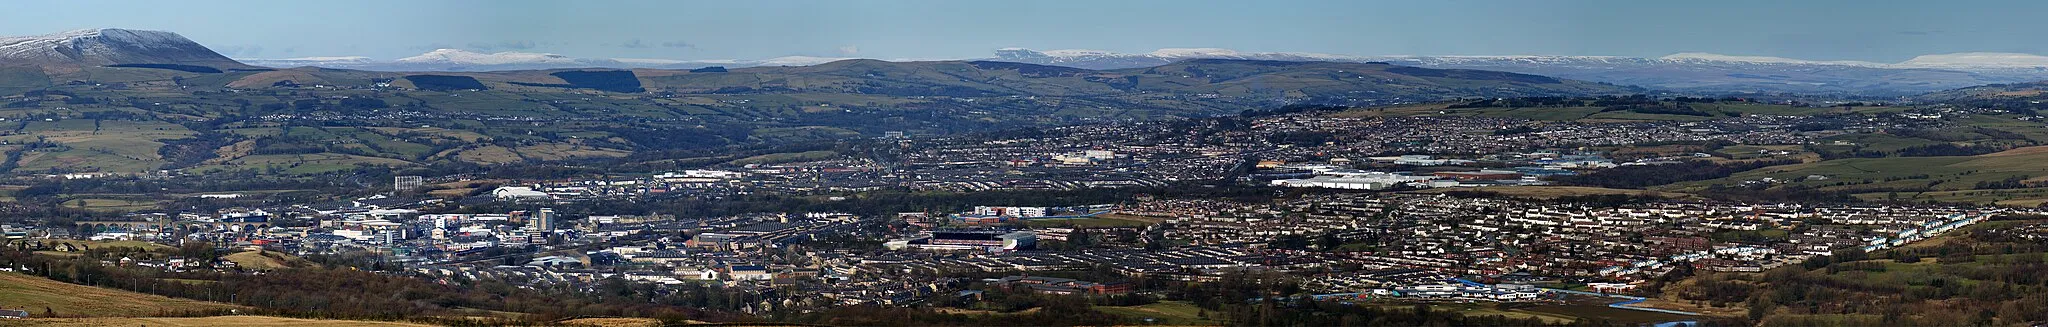 Photo showing: A panoramic image showing the town of Burnley from Crown point road. To the far top left of the image is the imposing Pendle Hill, with the Yorkshire Dales visible in the top central background. In the left of the image shows the town centre of Burnley and Turf Moor can be seen in the very centre of the picture. To the right the areas of Brunshaw and Pike Hill can be seen.